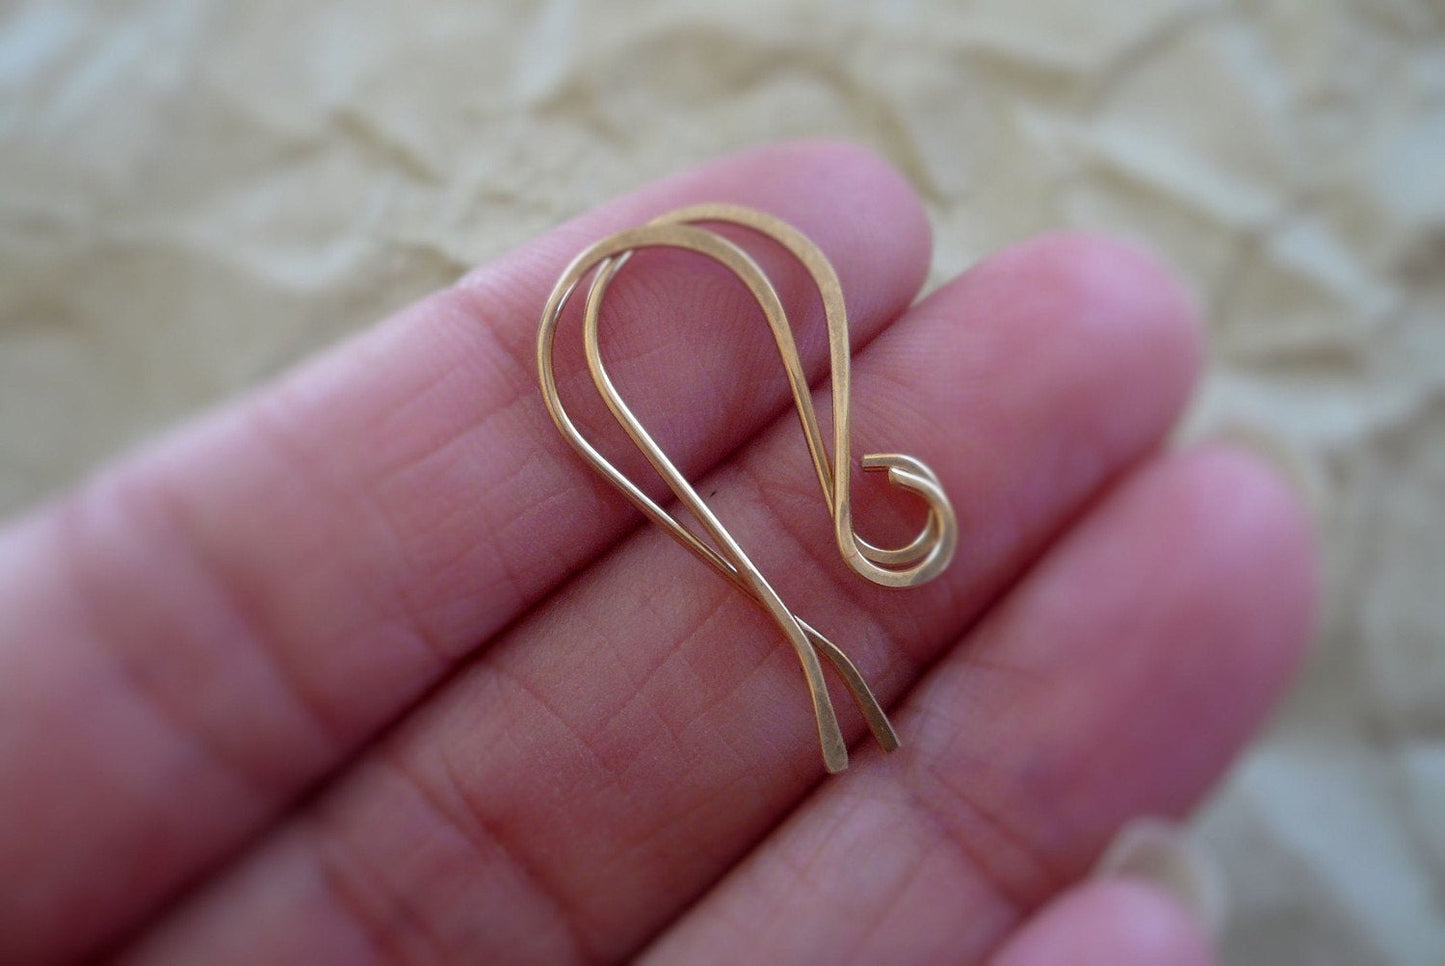 Sample Pack 14kt Goldfill Earwires - Handmade. Handforged. Made to Order